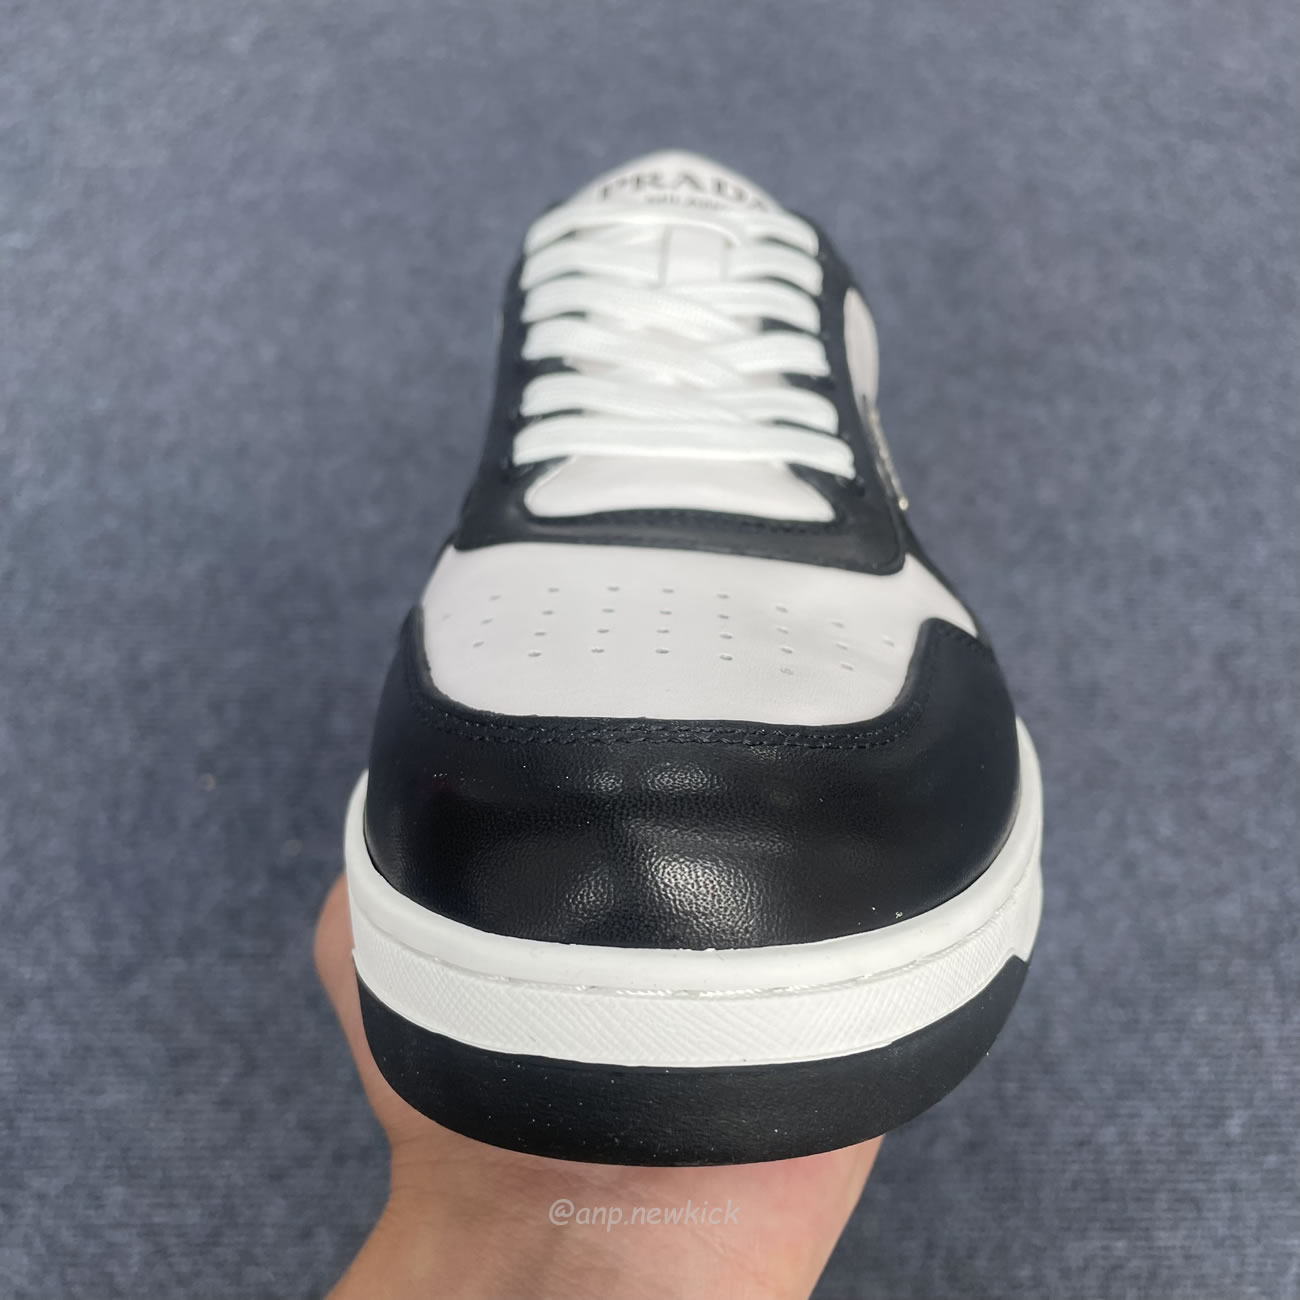 Prada Downtown Low Top Sneakers Leather White Black 2ee364 3lkg F0964 (8) - newkick.org